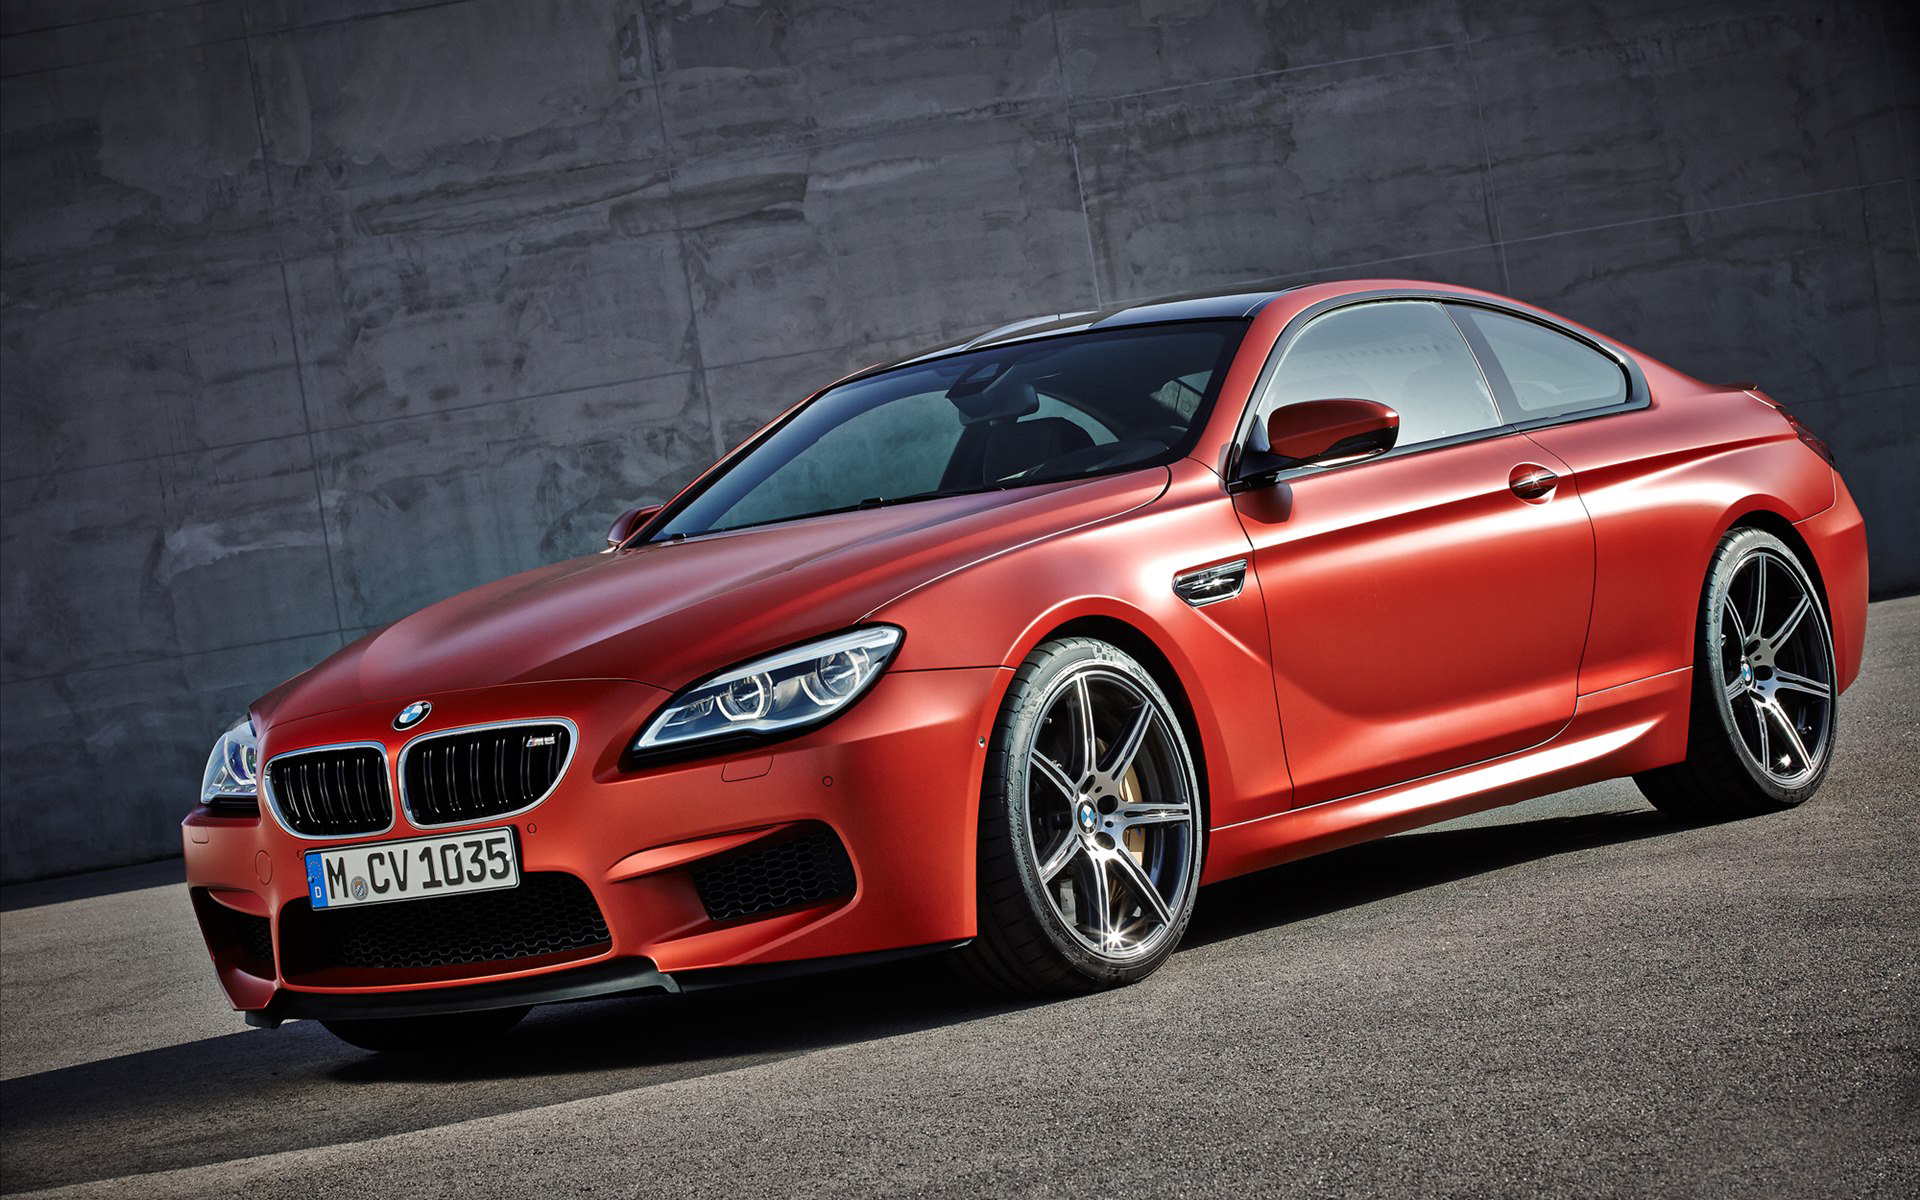 2015 BMW M6 Coupe Wallpaper | HD Car Wallpapers